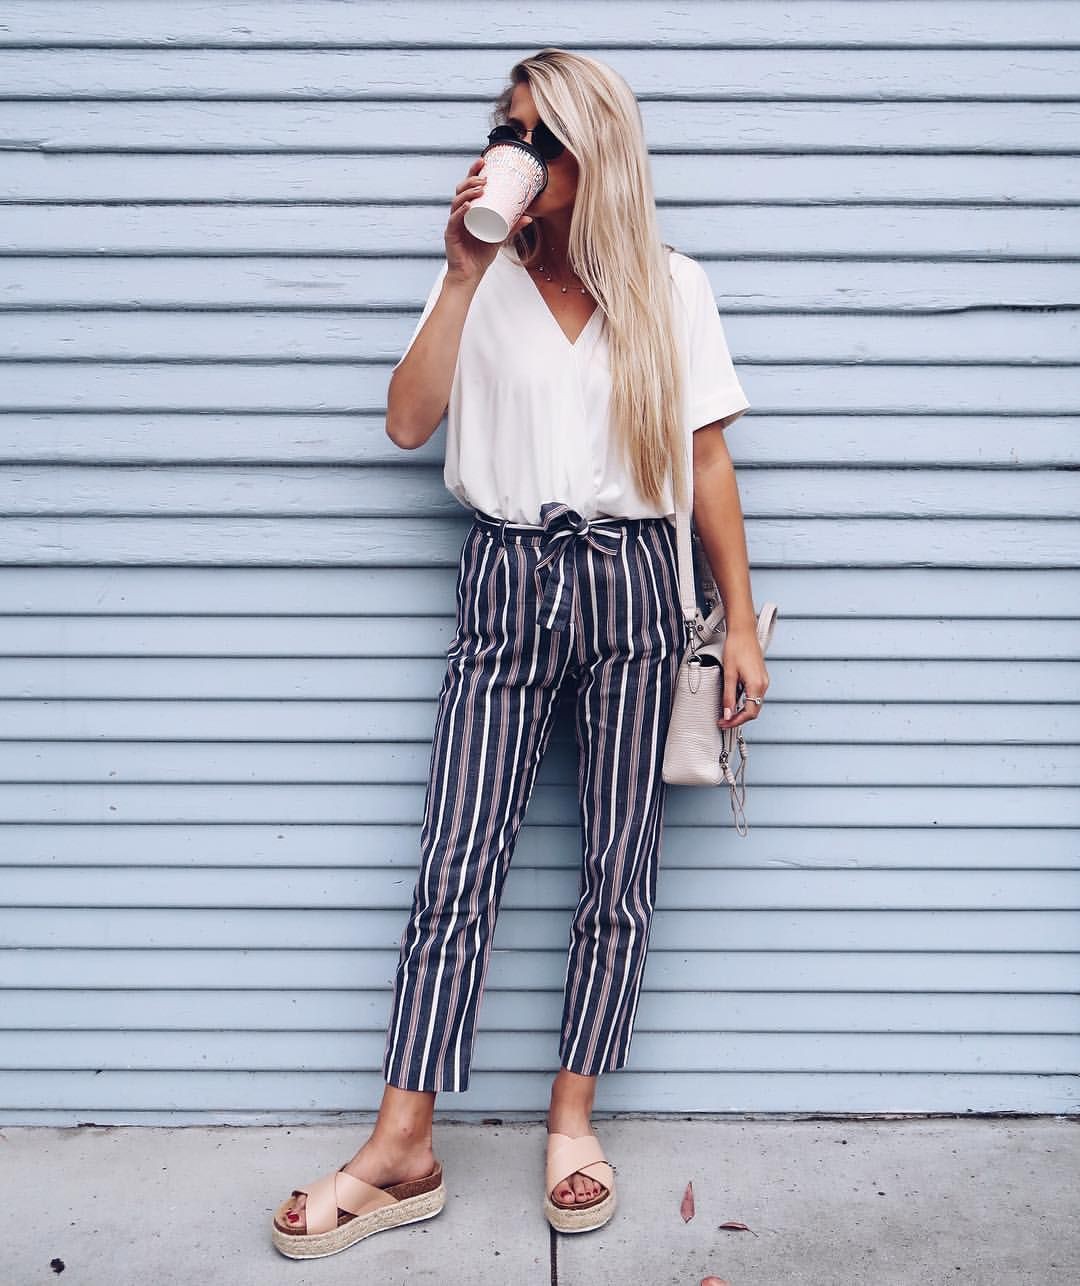 Striped Pant Outfit: Casual Outfits,  Pant Outfits,  Stripe Trousers  